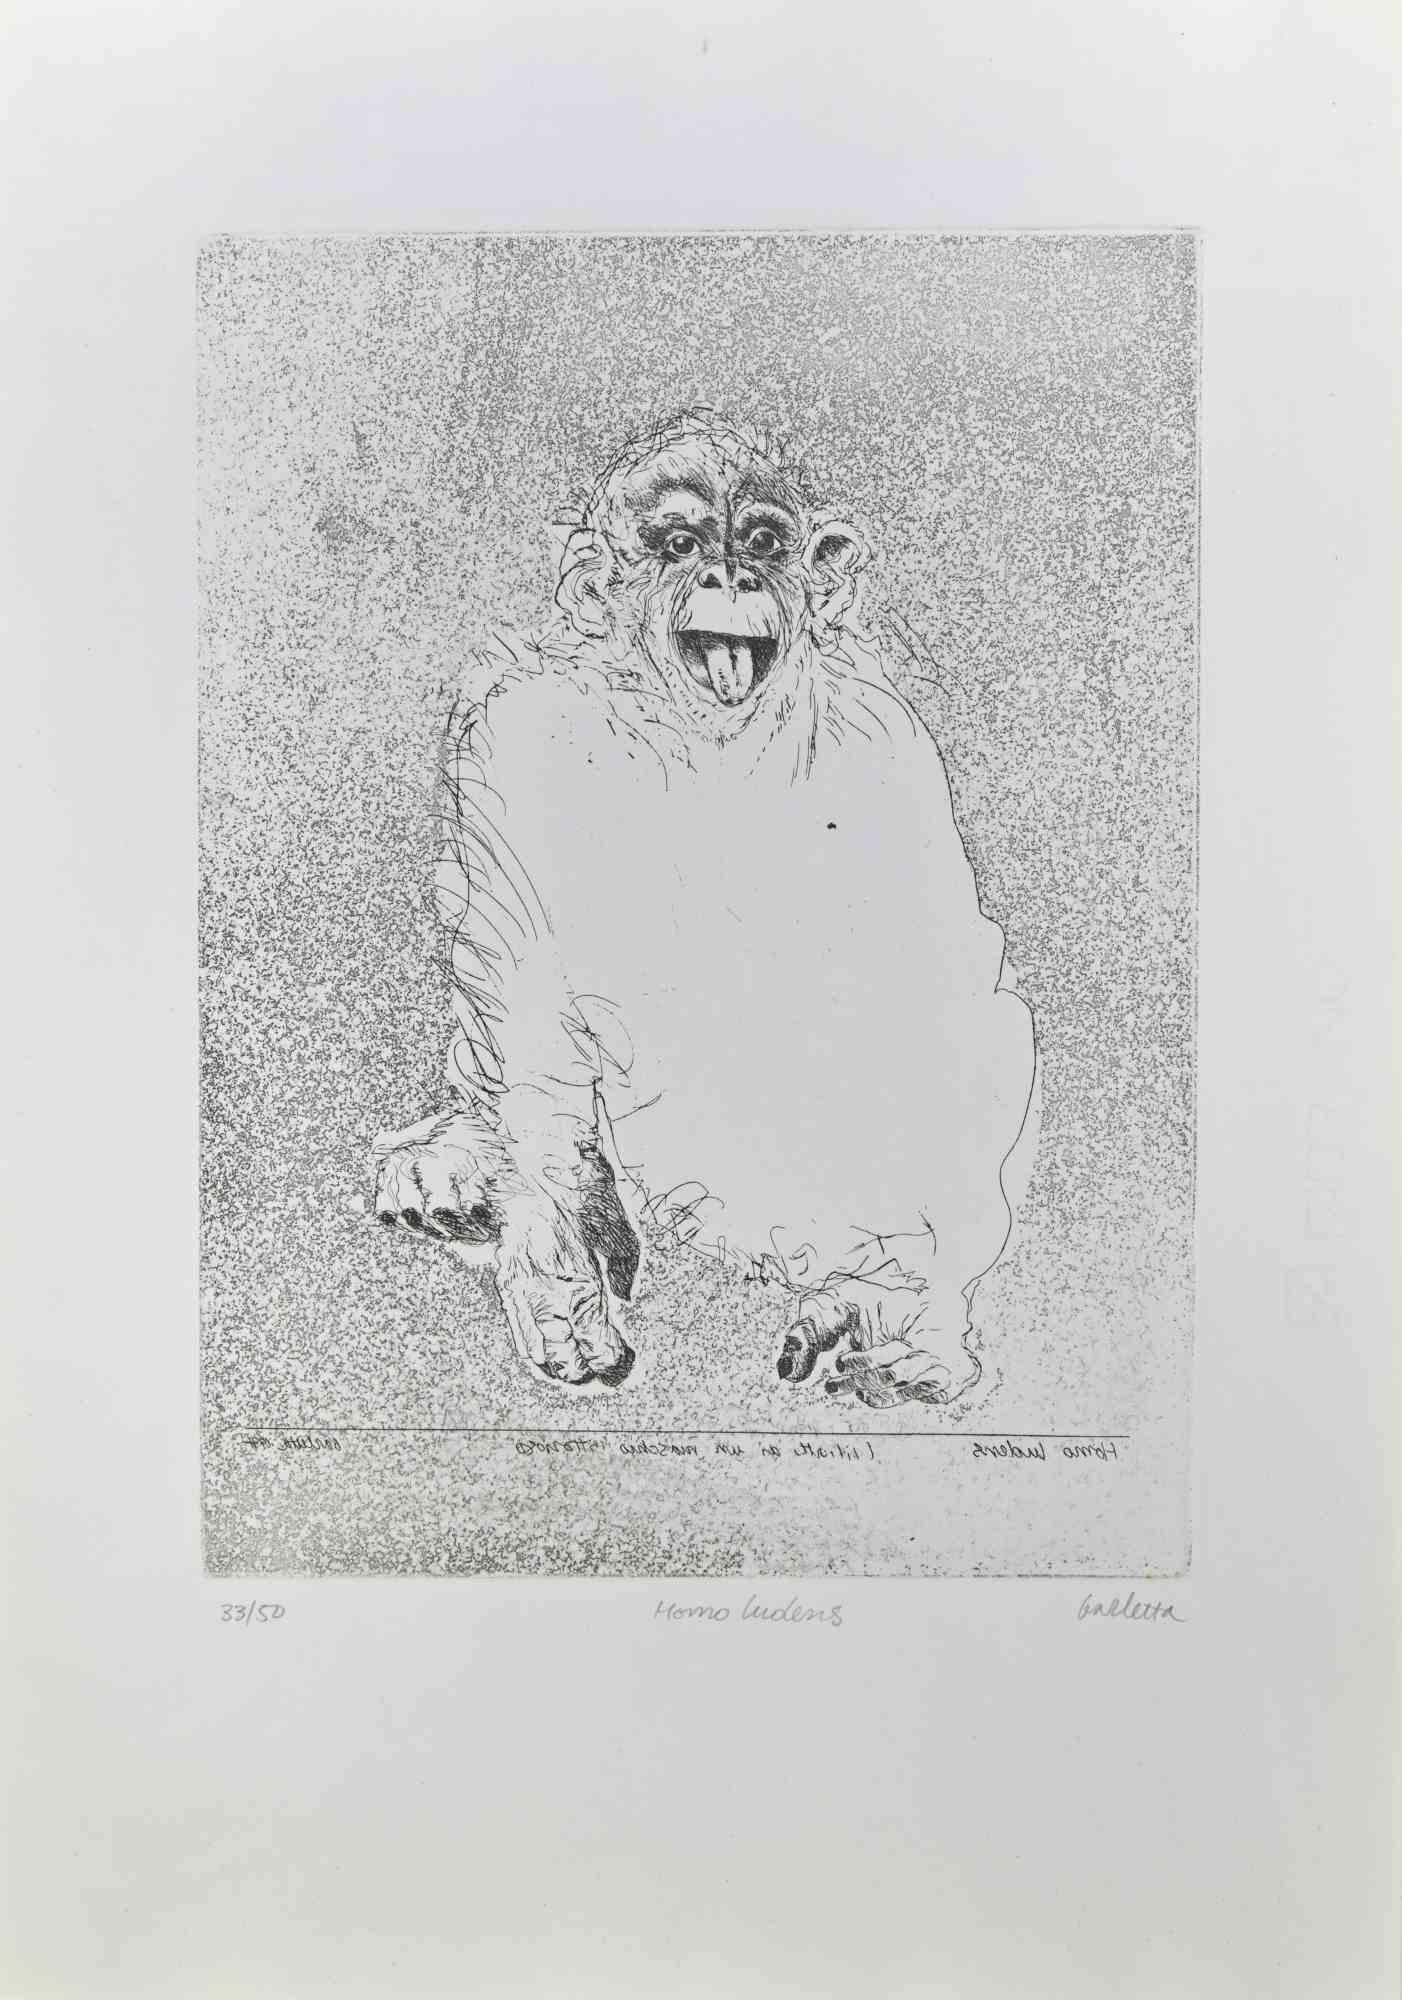 Homo Ludens  is an etching realized by  Sergio Barletta in 1991.

Hand-signed  lower right in pencil, and titled lower center "Homo Ludens". Numbered lower left, from the edition of 50 prints.

Good conditions.

Sergio Barletta (1934) is an Italian